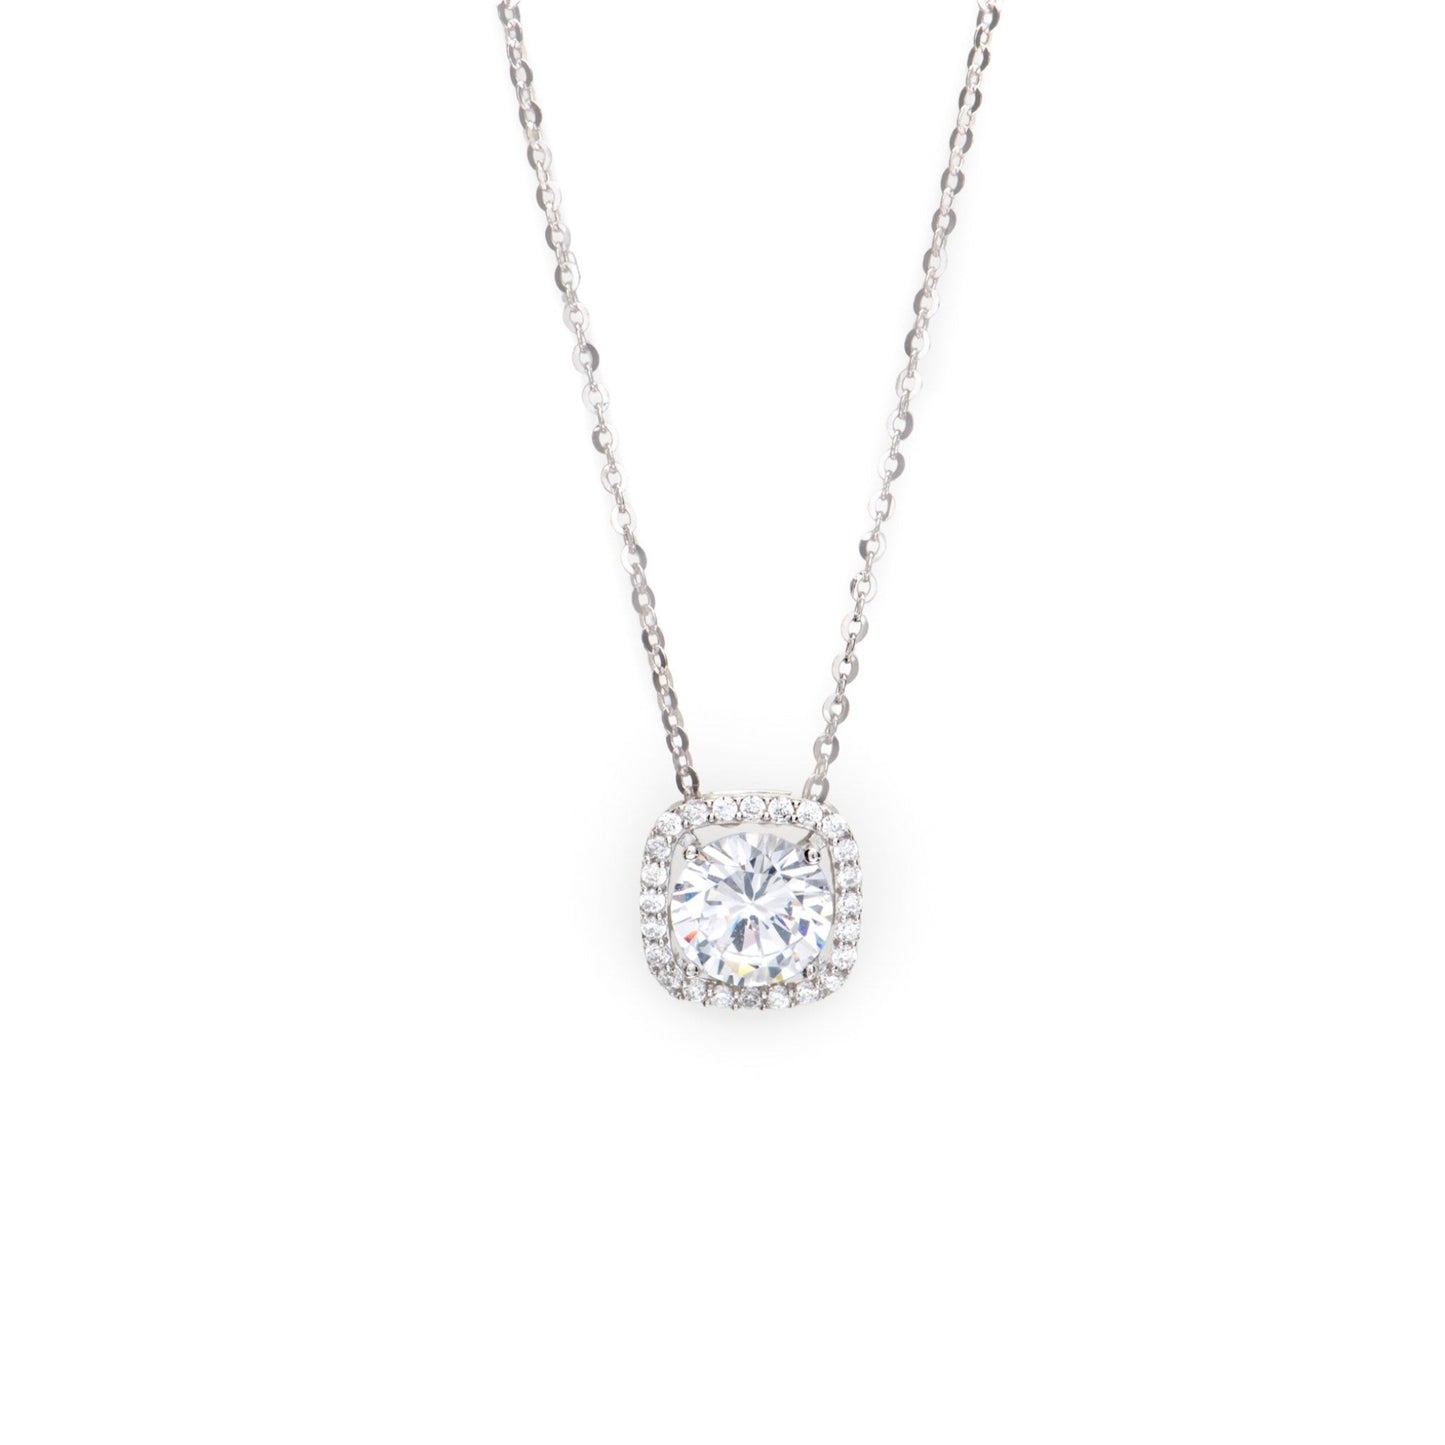 CZ Square Necklace and Earring Set